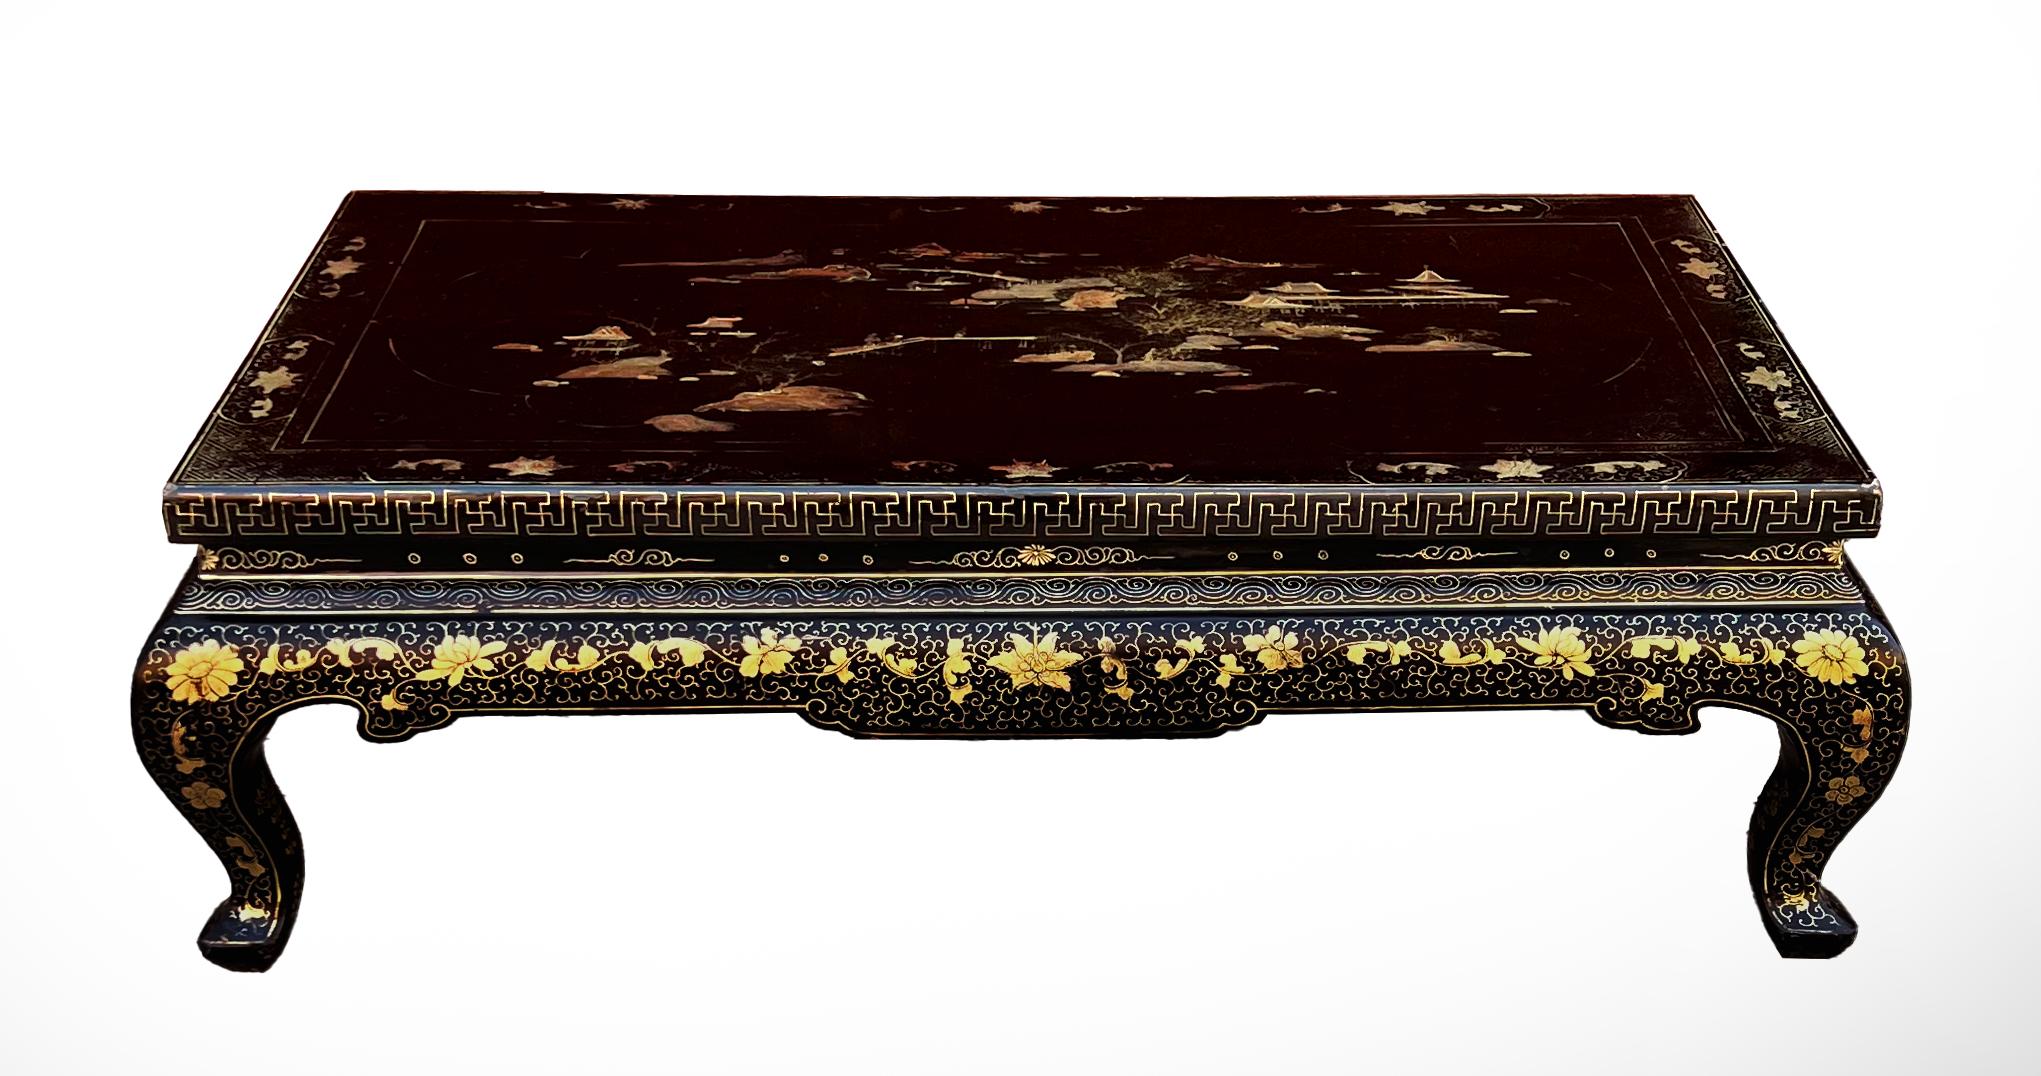 A stunning black lacquer and gilt Chinese low table. The top of the table exhibits extremely fine painted landscape scenes while the frieze and legs are decorated with gold meanders and floral motifs.